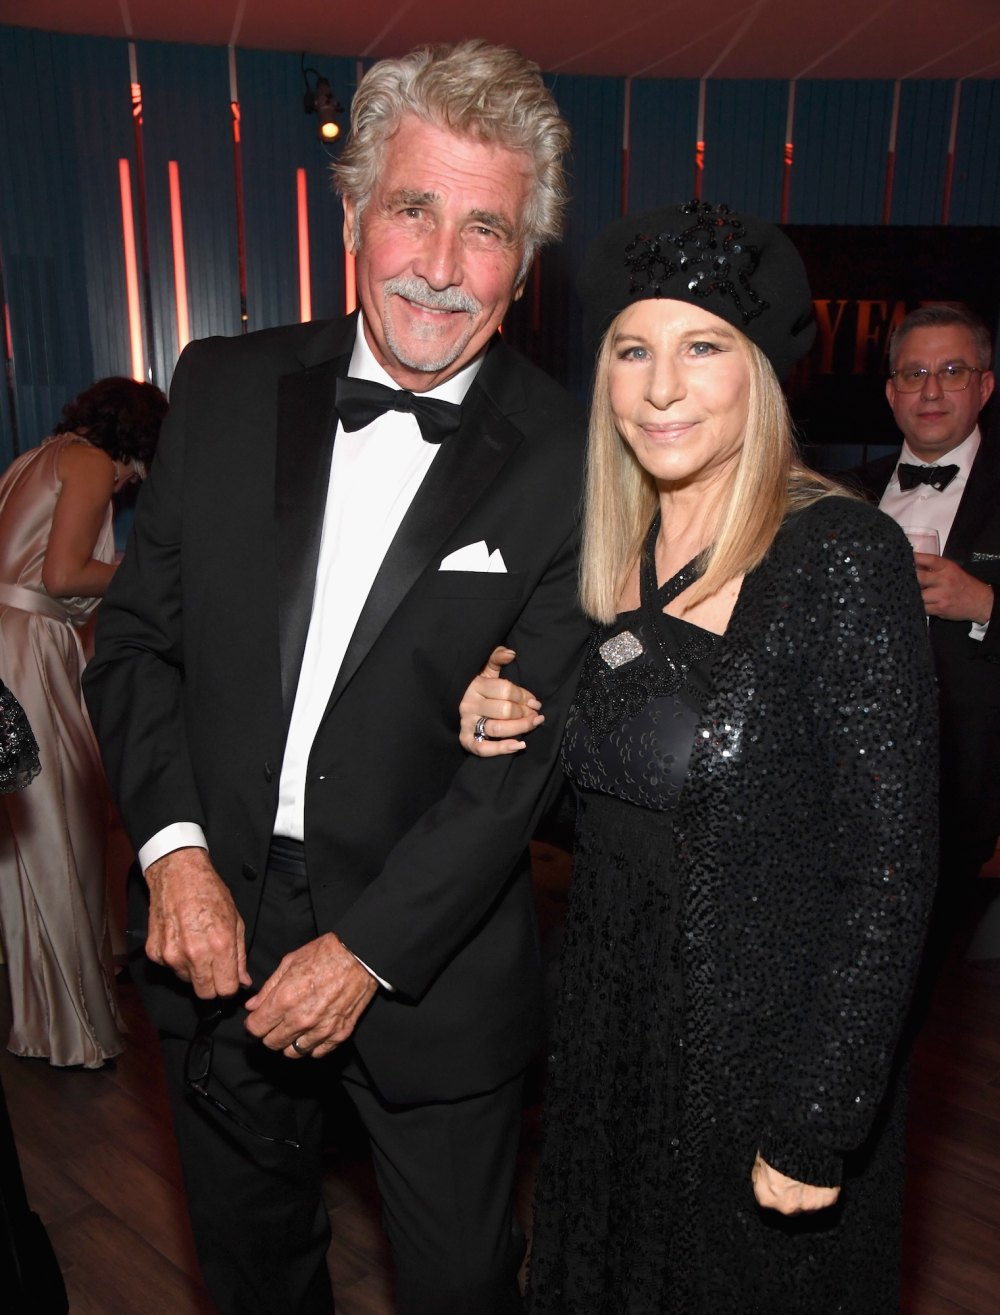 James Brolin Listens to Wife Barbra Streisand’s Music in His Car